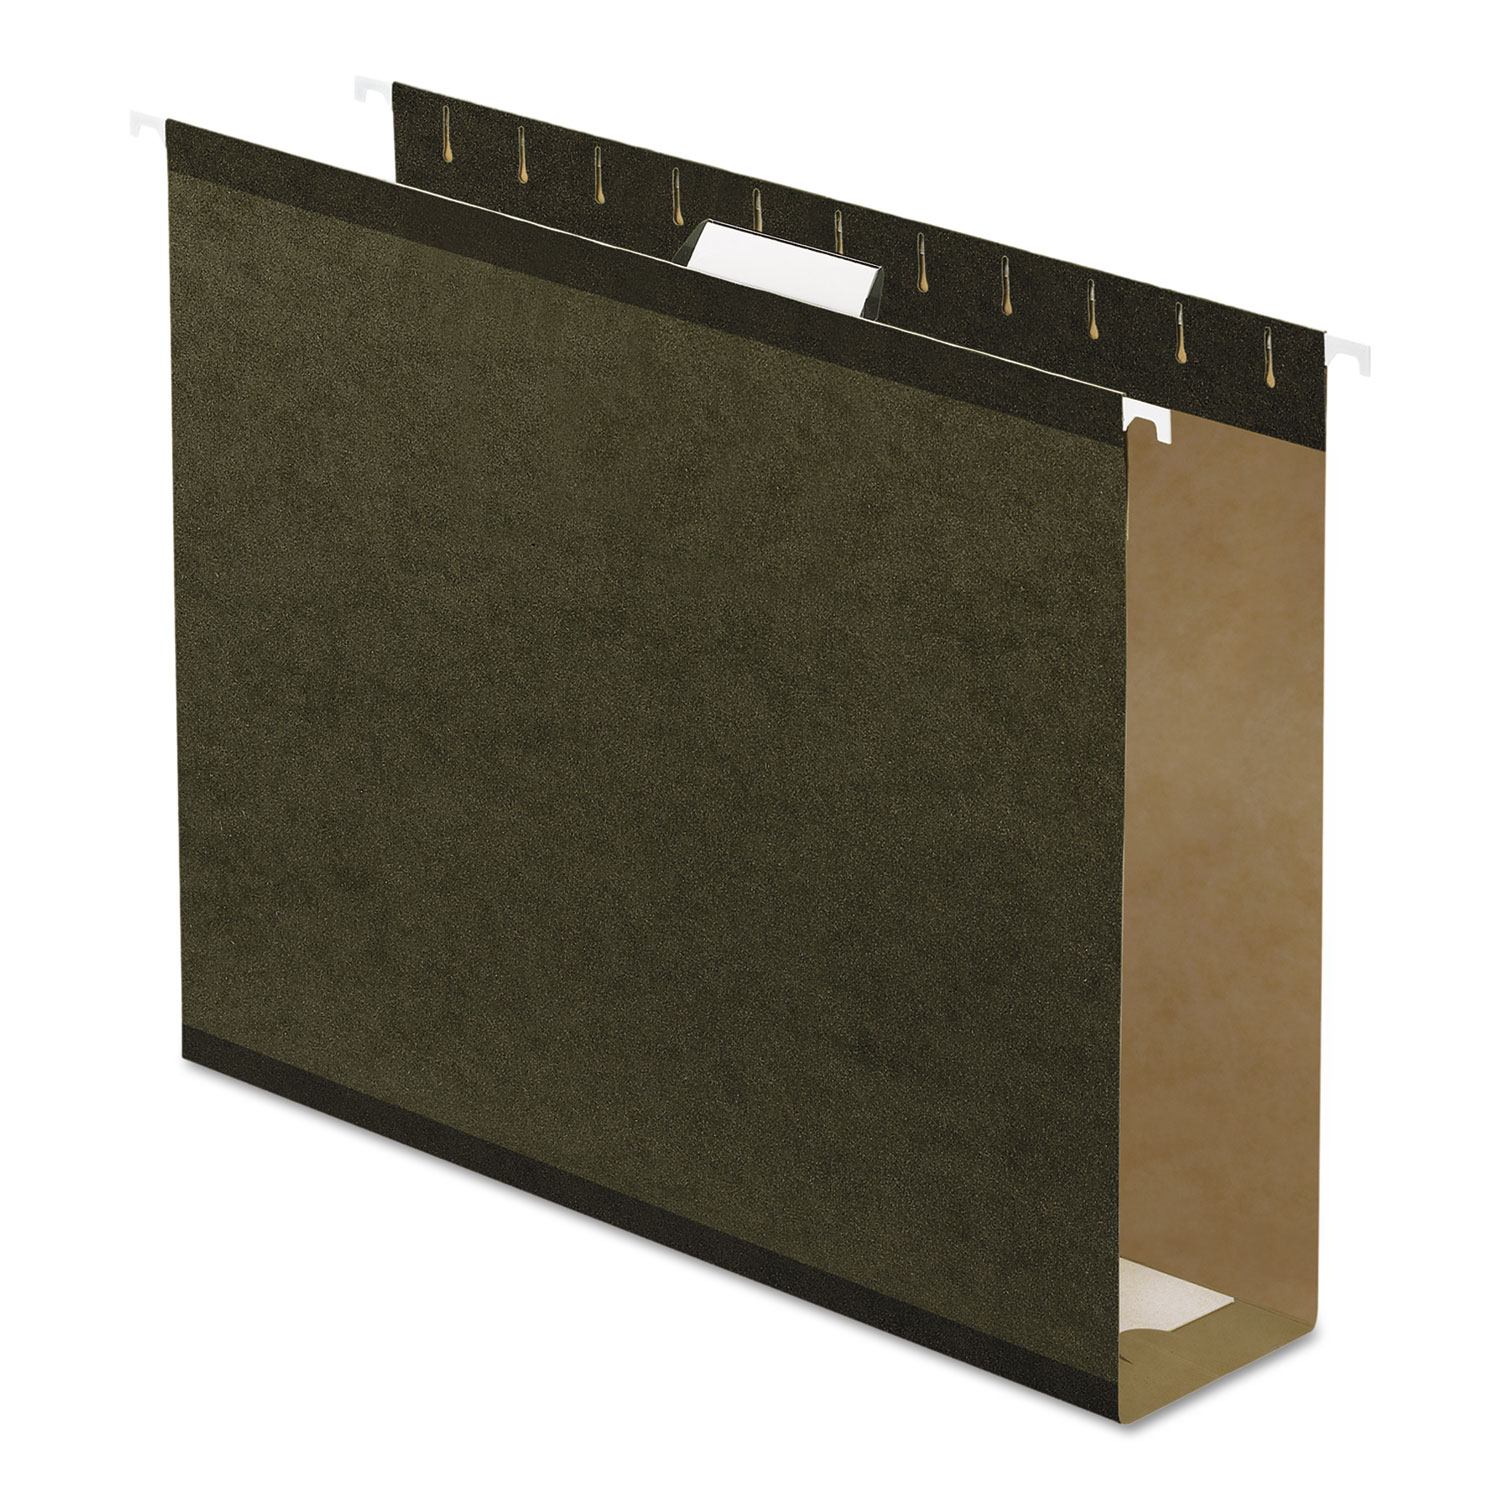  Pendaflex 04152X3 Extra Capacity Reinforced Hanging File Folders with Box Bottom, Letter Size, 1/5-Cut Tab, Standard Green, 25/Box (PFX4152X3) 